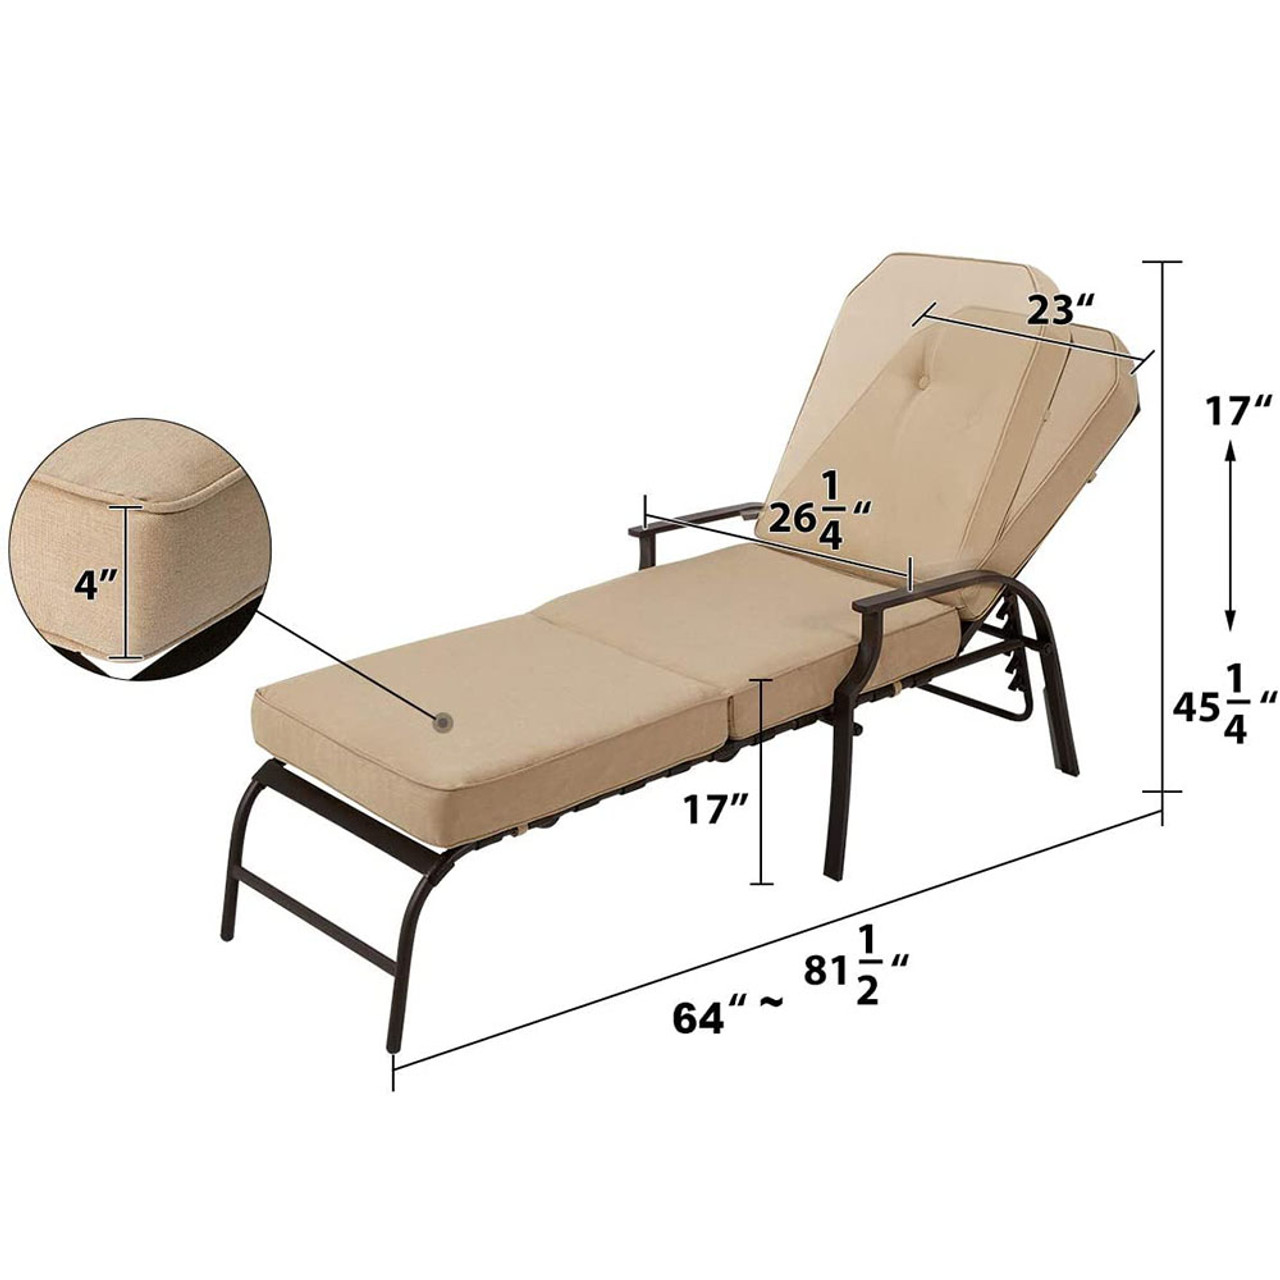 Adjustable Outdoor Patio Chaise Lounge Chair  product image